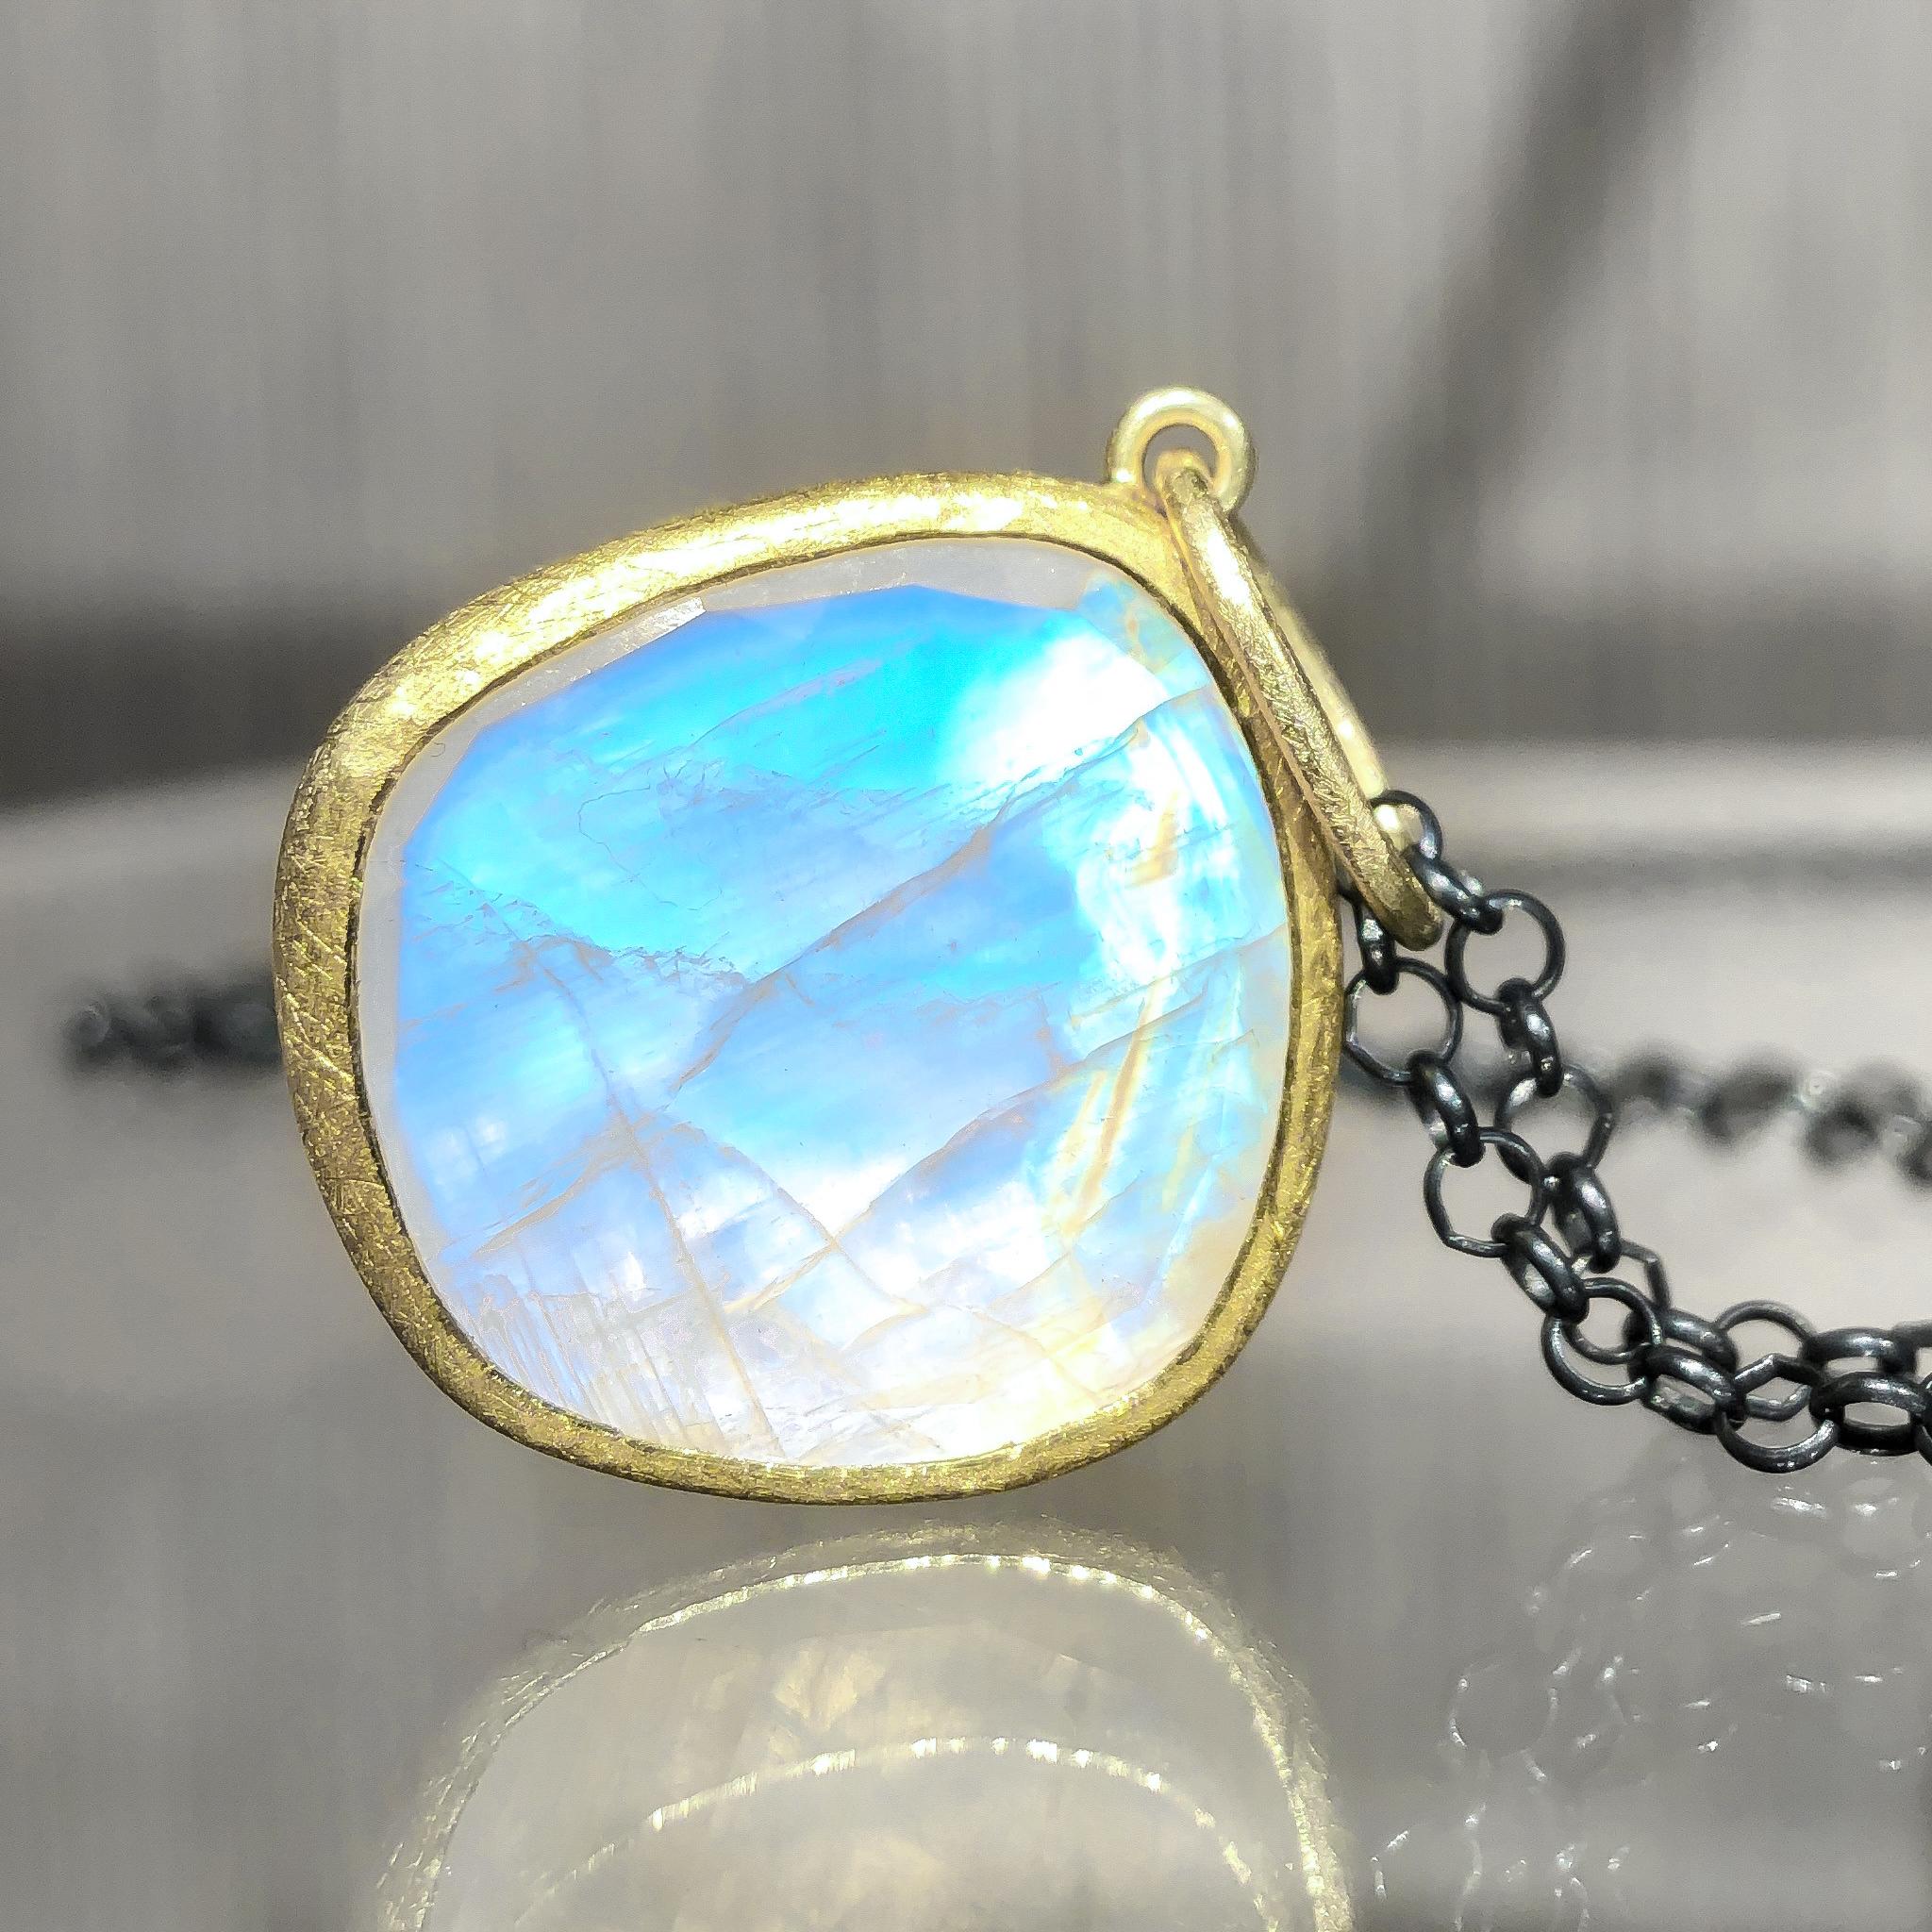 One of a Kind Necklace hand-fabricated by acclaimed jewelry maker Petra Class featuring a spectacular 11.3 carat faceted rainbow moonstone bezel-set in the artist's signature finely-textured 22k yellow gold. With a bail measuring 3/8 of an inch, the